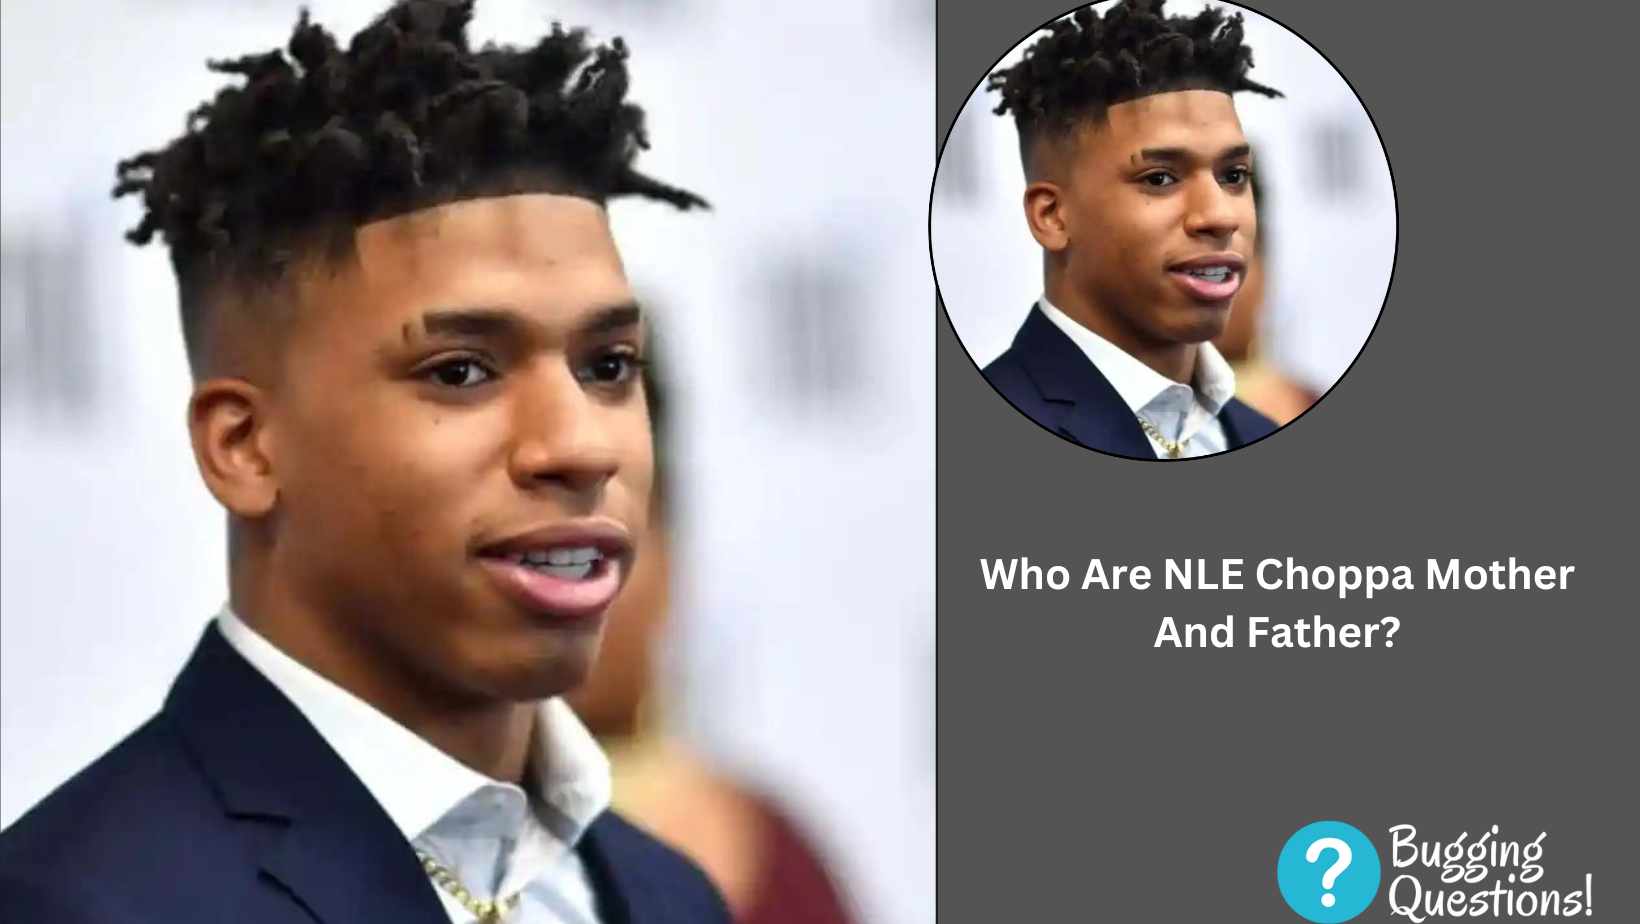 Who Are NLE Choppa Mother And Father?